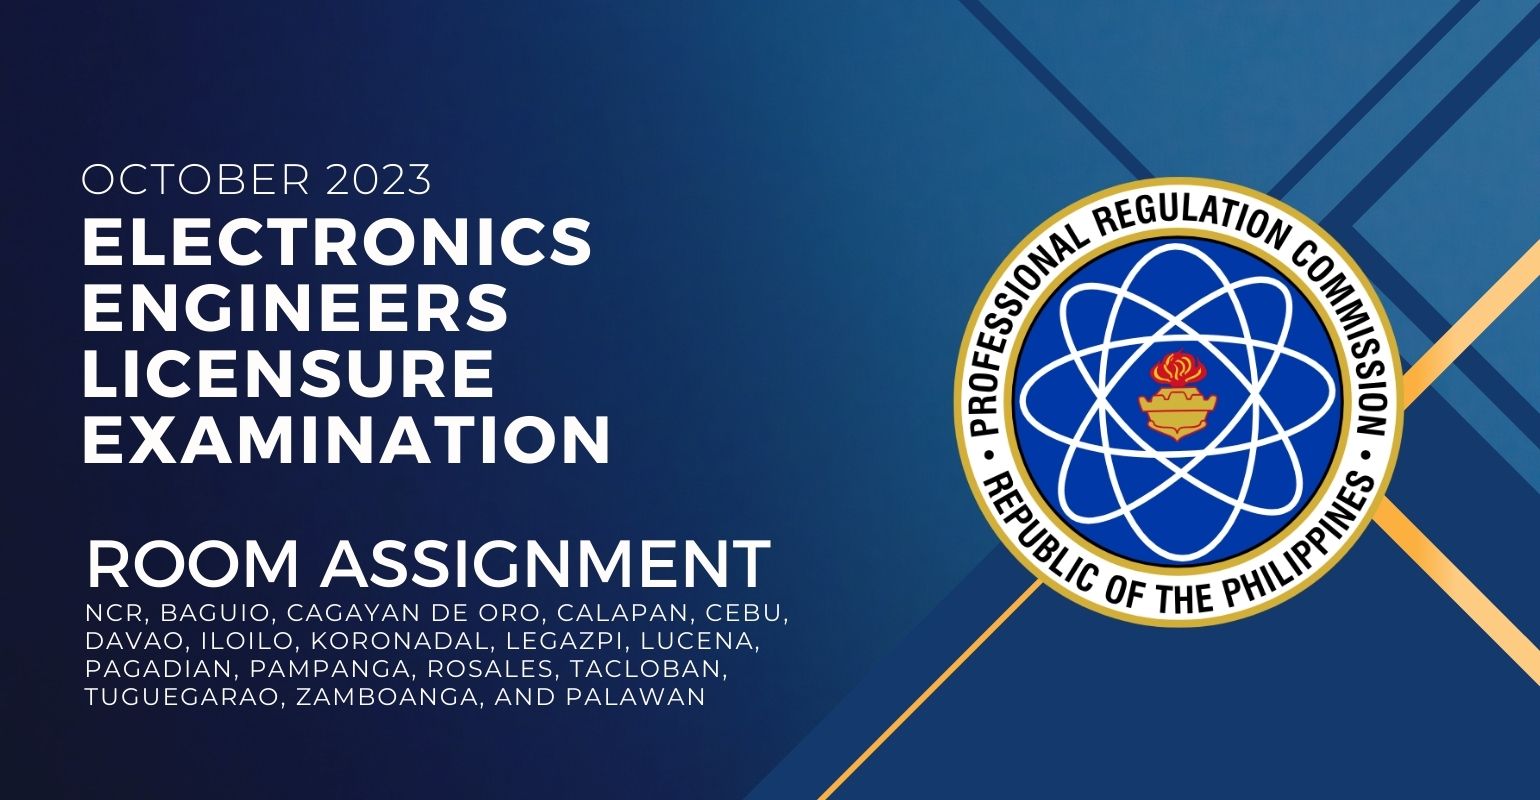 room assignment october 2023 electronic engineers licensure exam